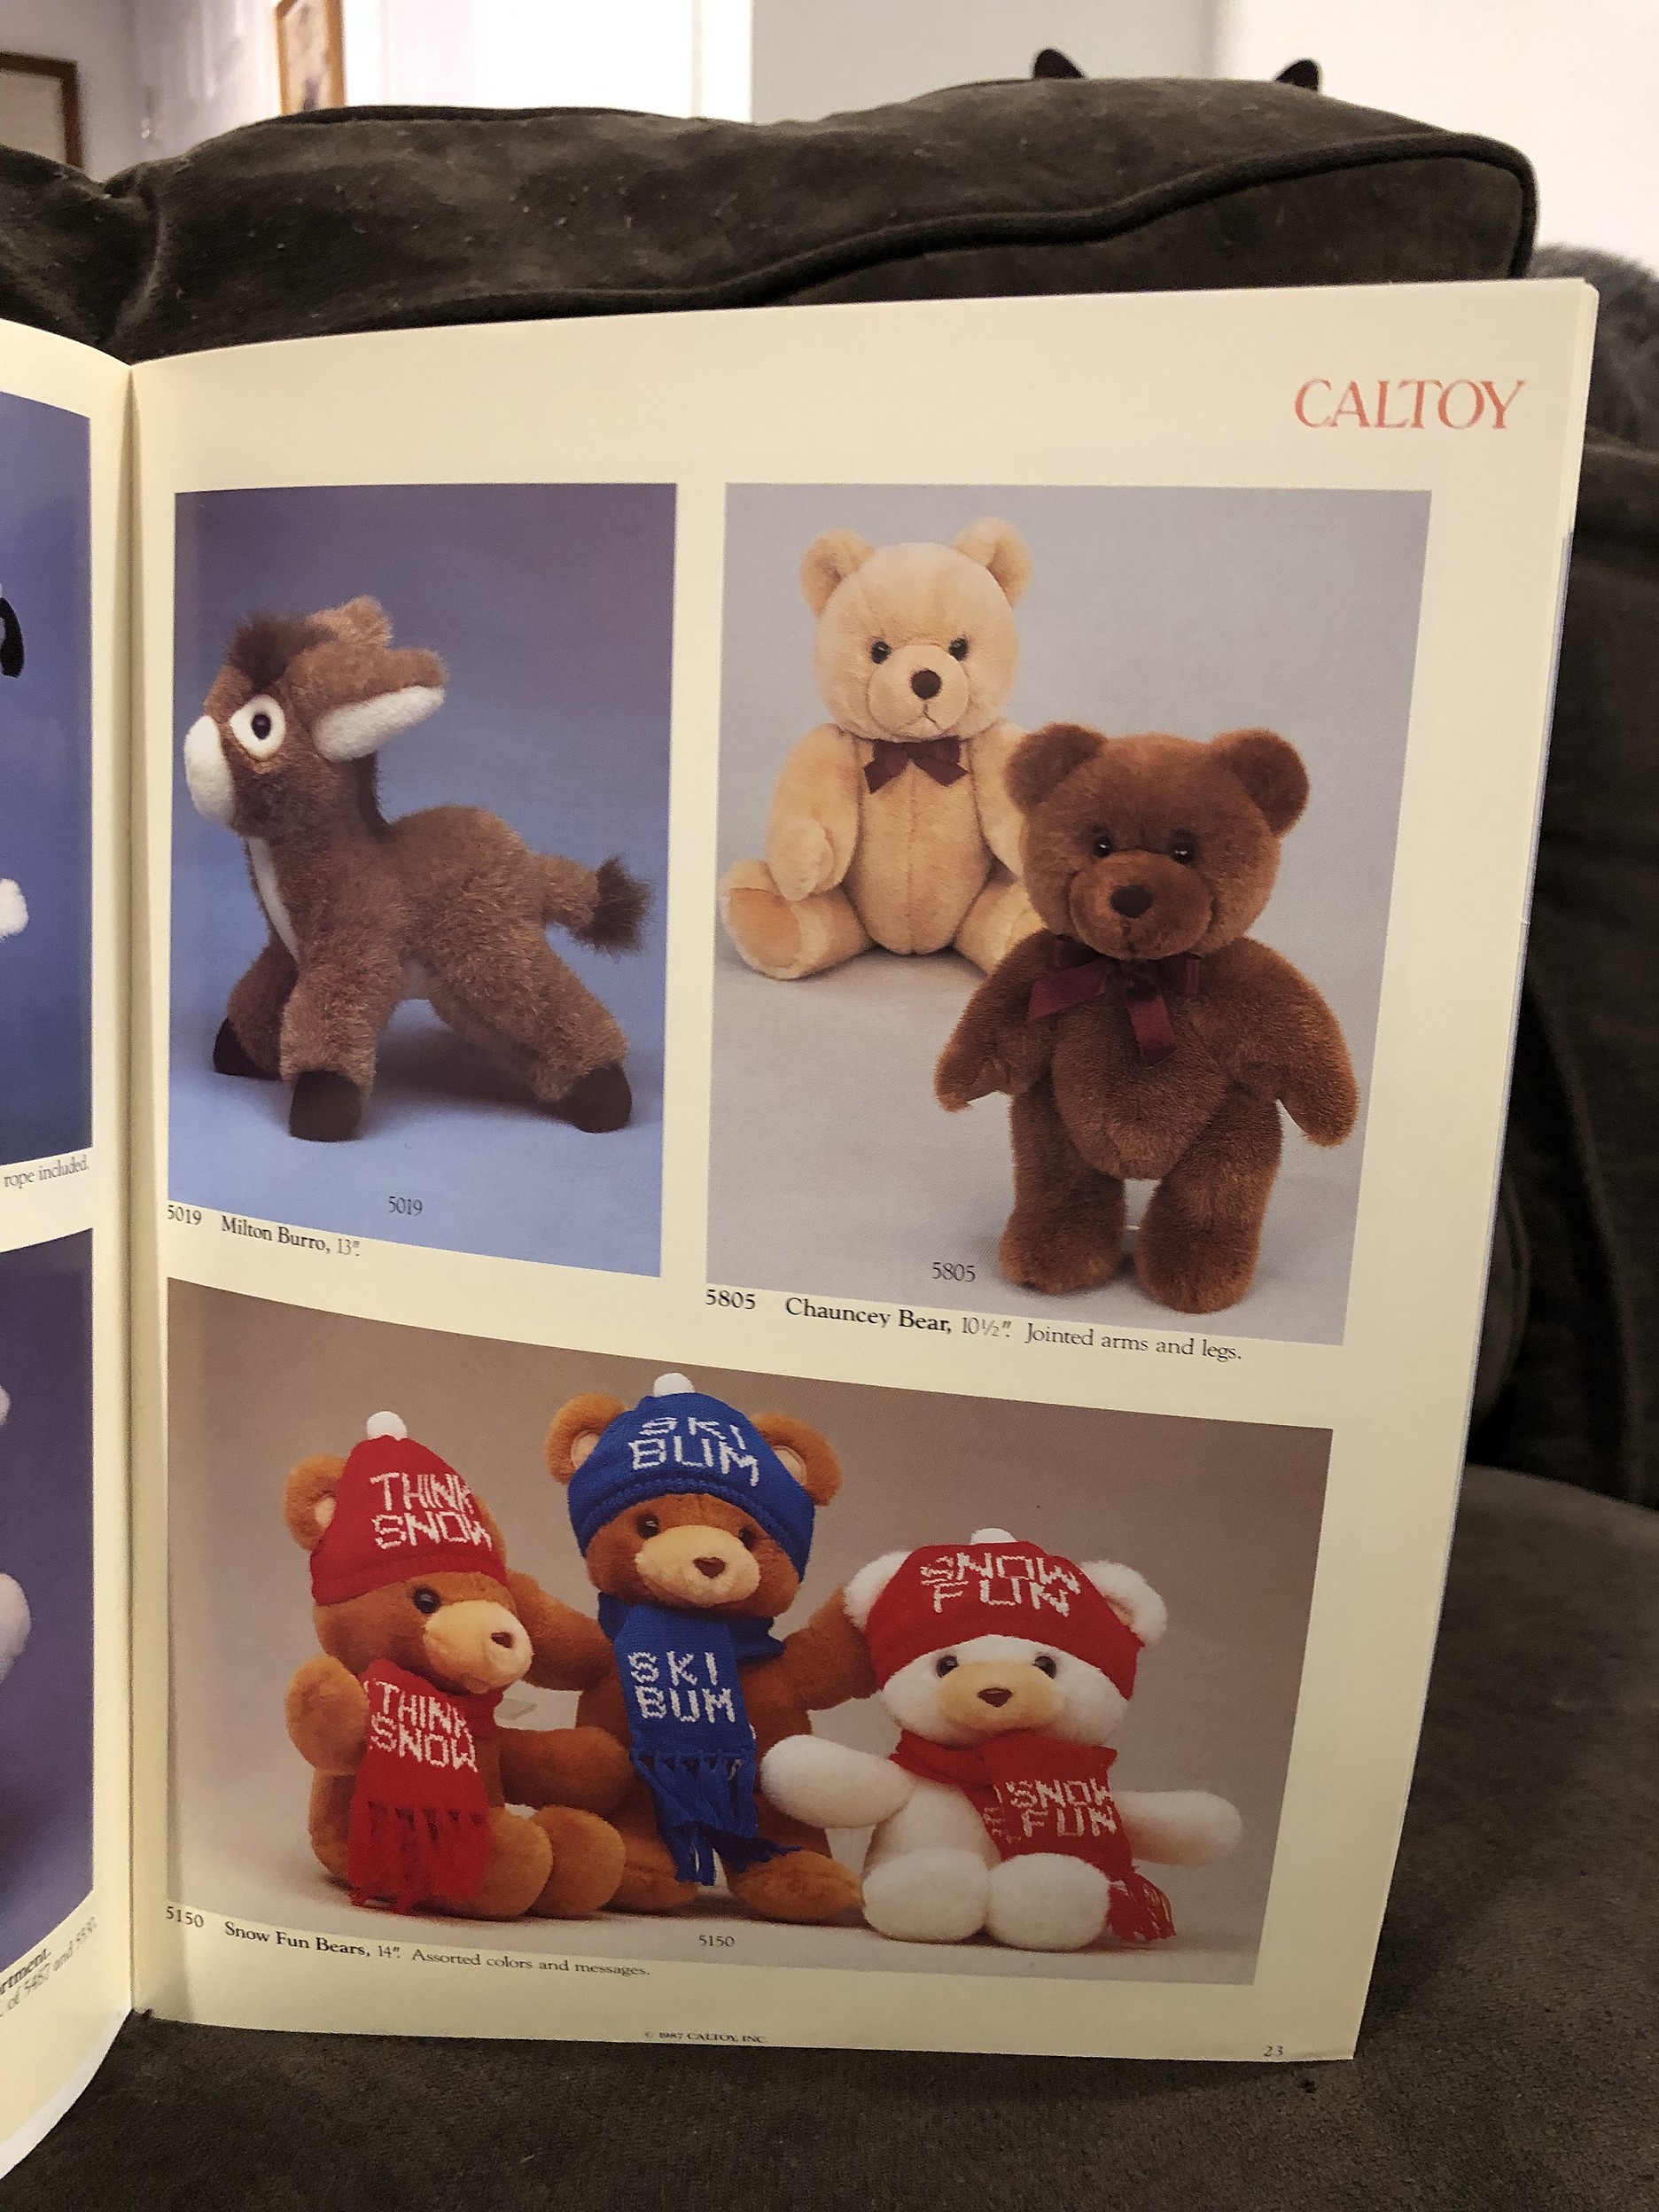 1987 Caltoy - California Stuffed Toys - Toy Catalog - Parry Game Preserve